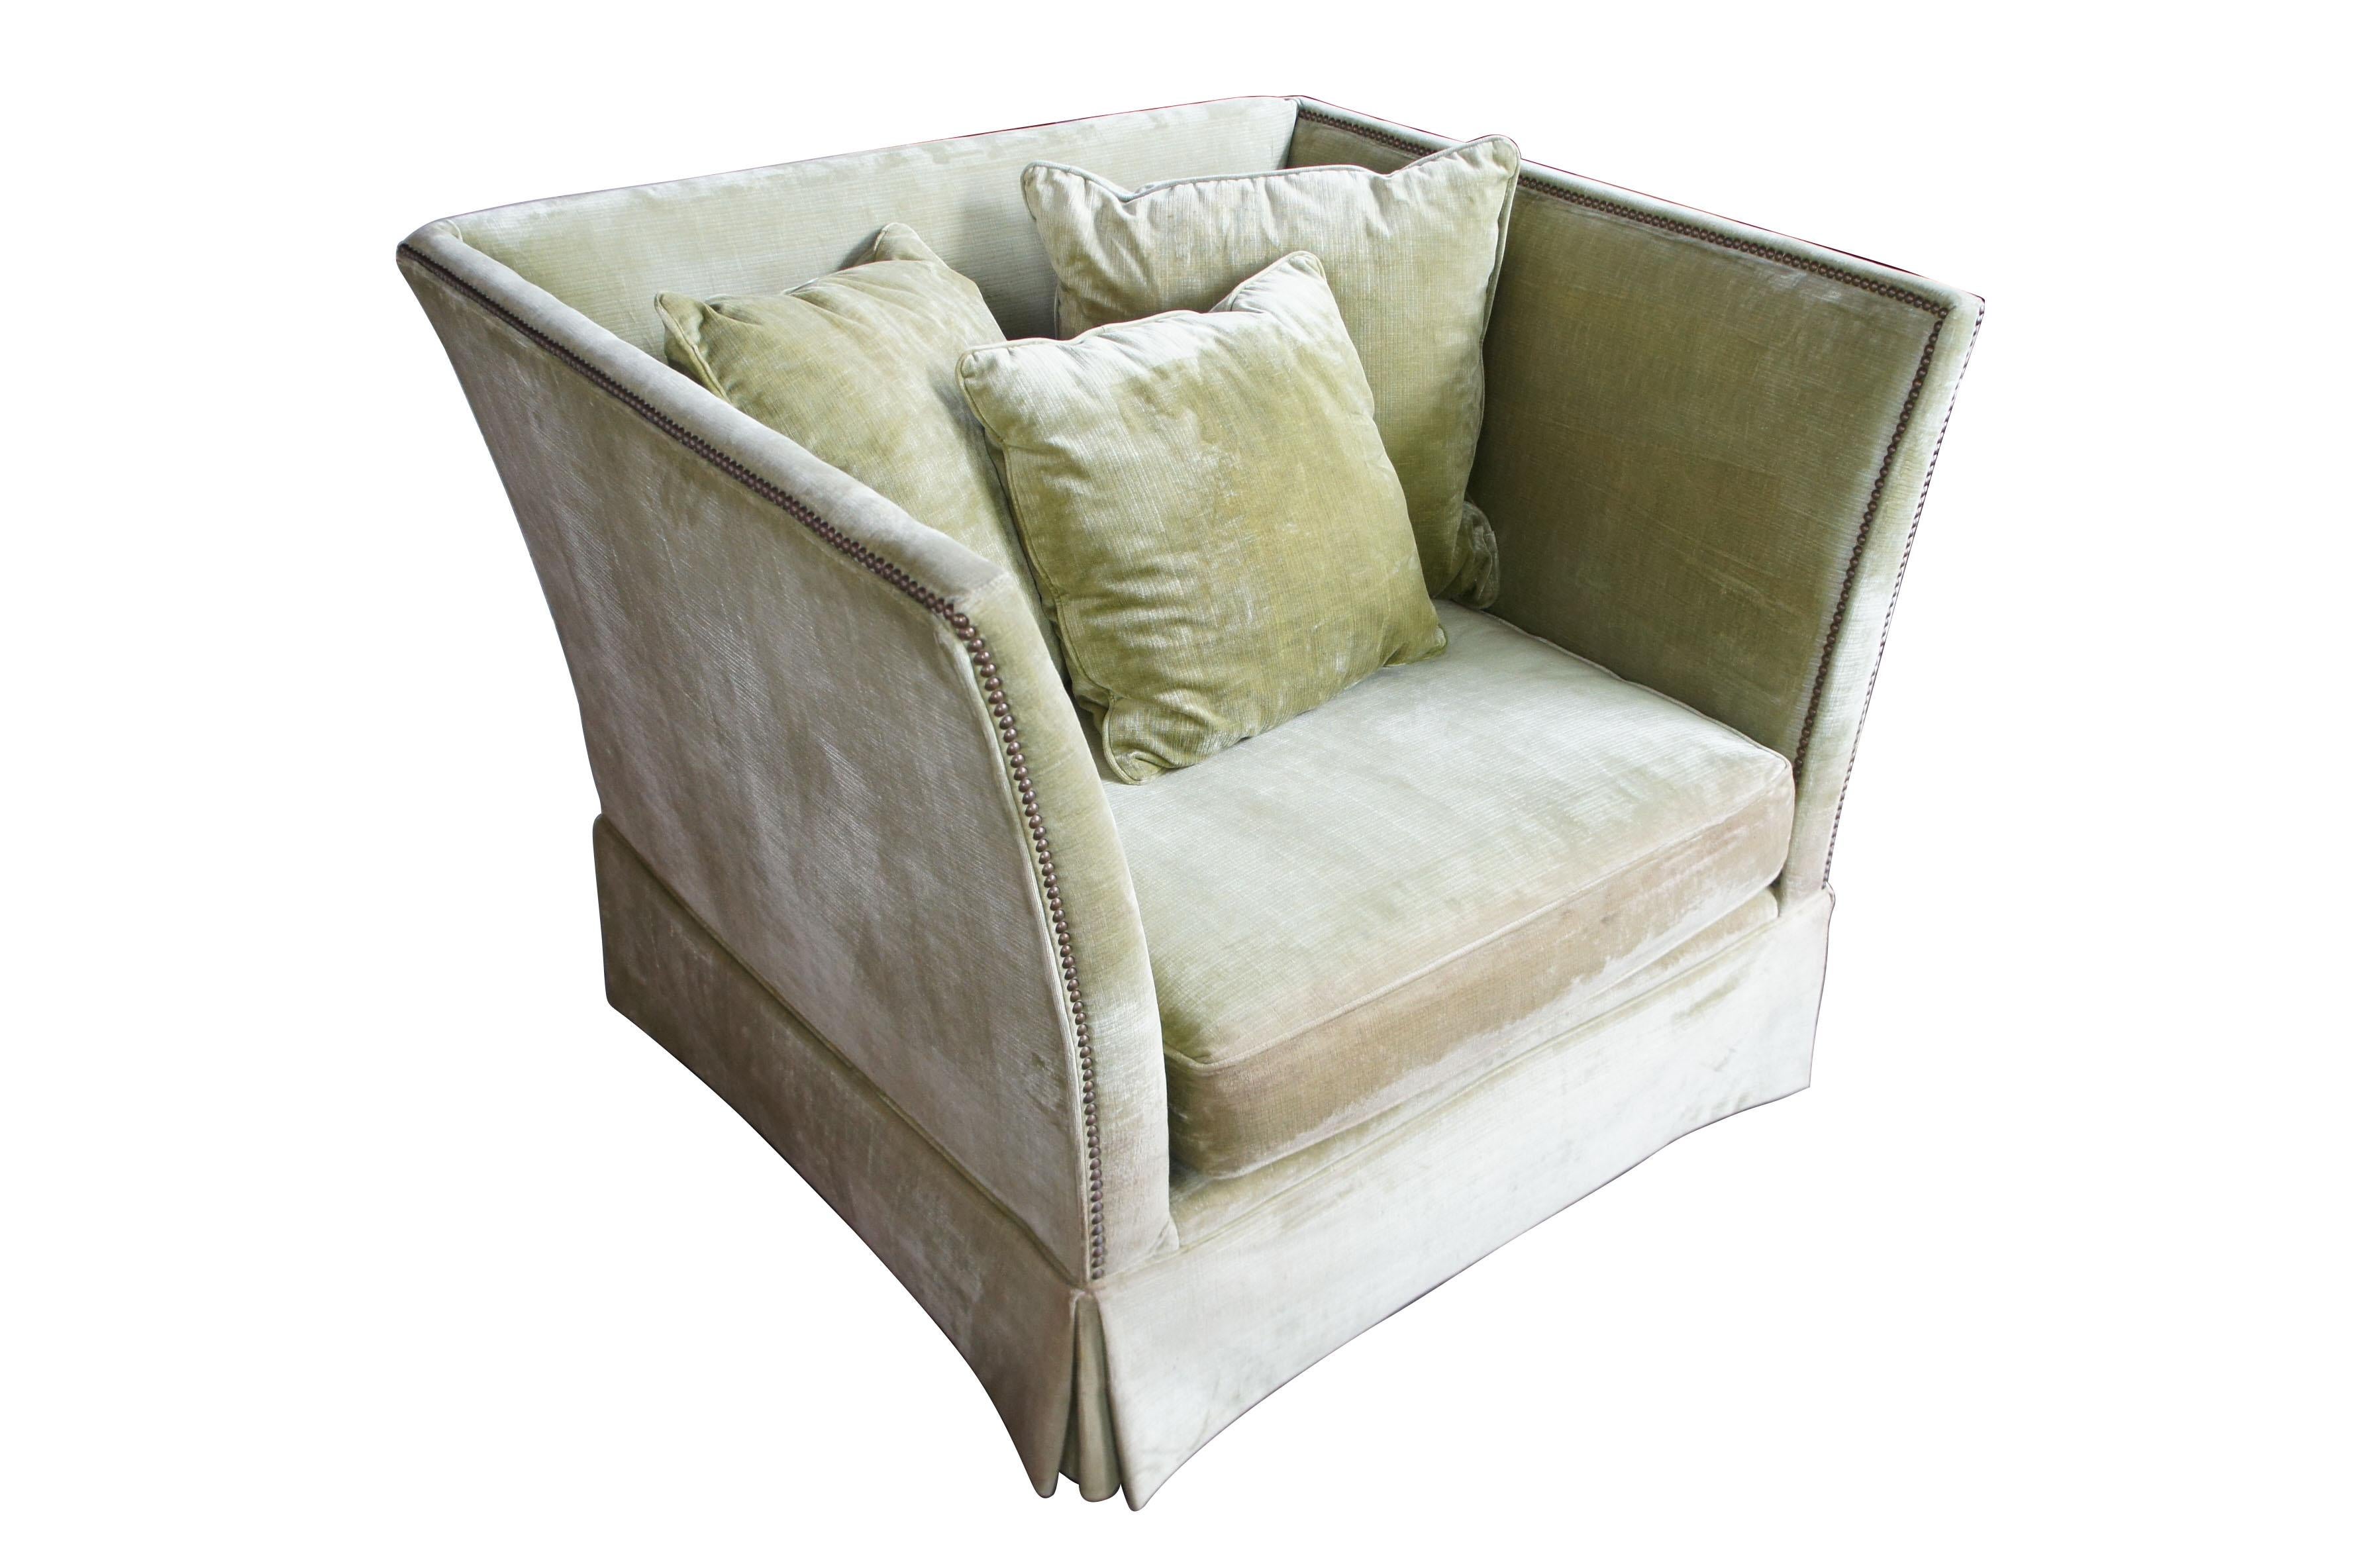 Z Gallerie oversized olive green corduroy square easy club chair nailhead trim

Olive green square club chair. With flared arms, matching pillows and nailhead trim it’s the perfect statement for any setting.